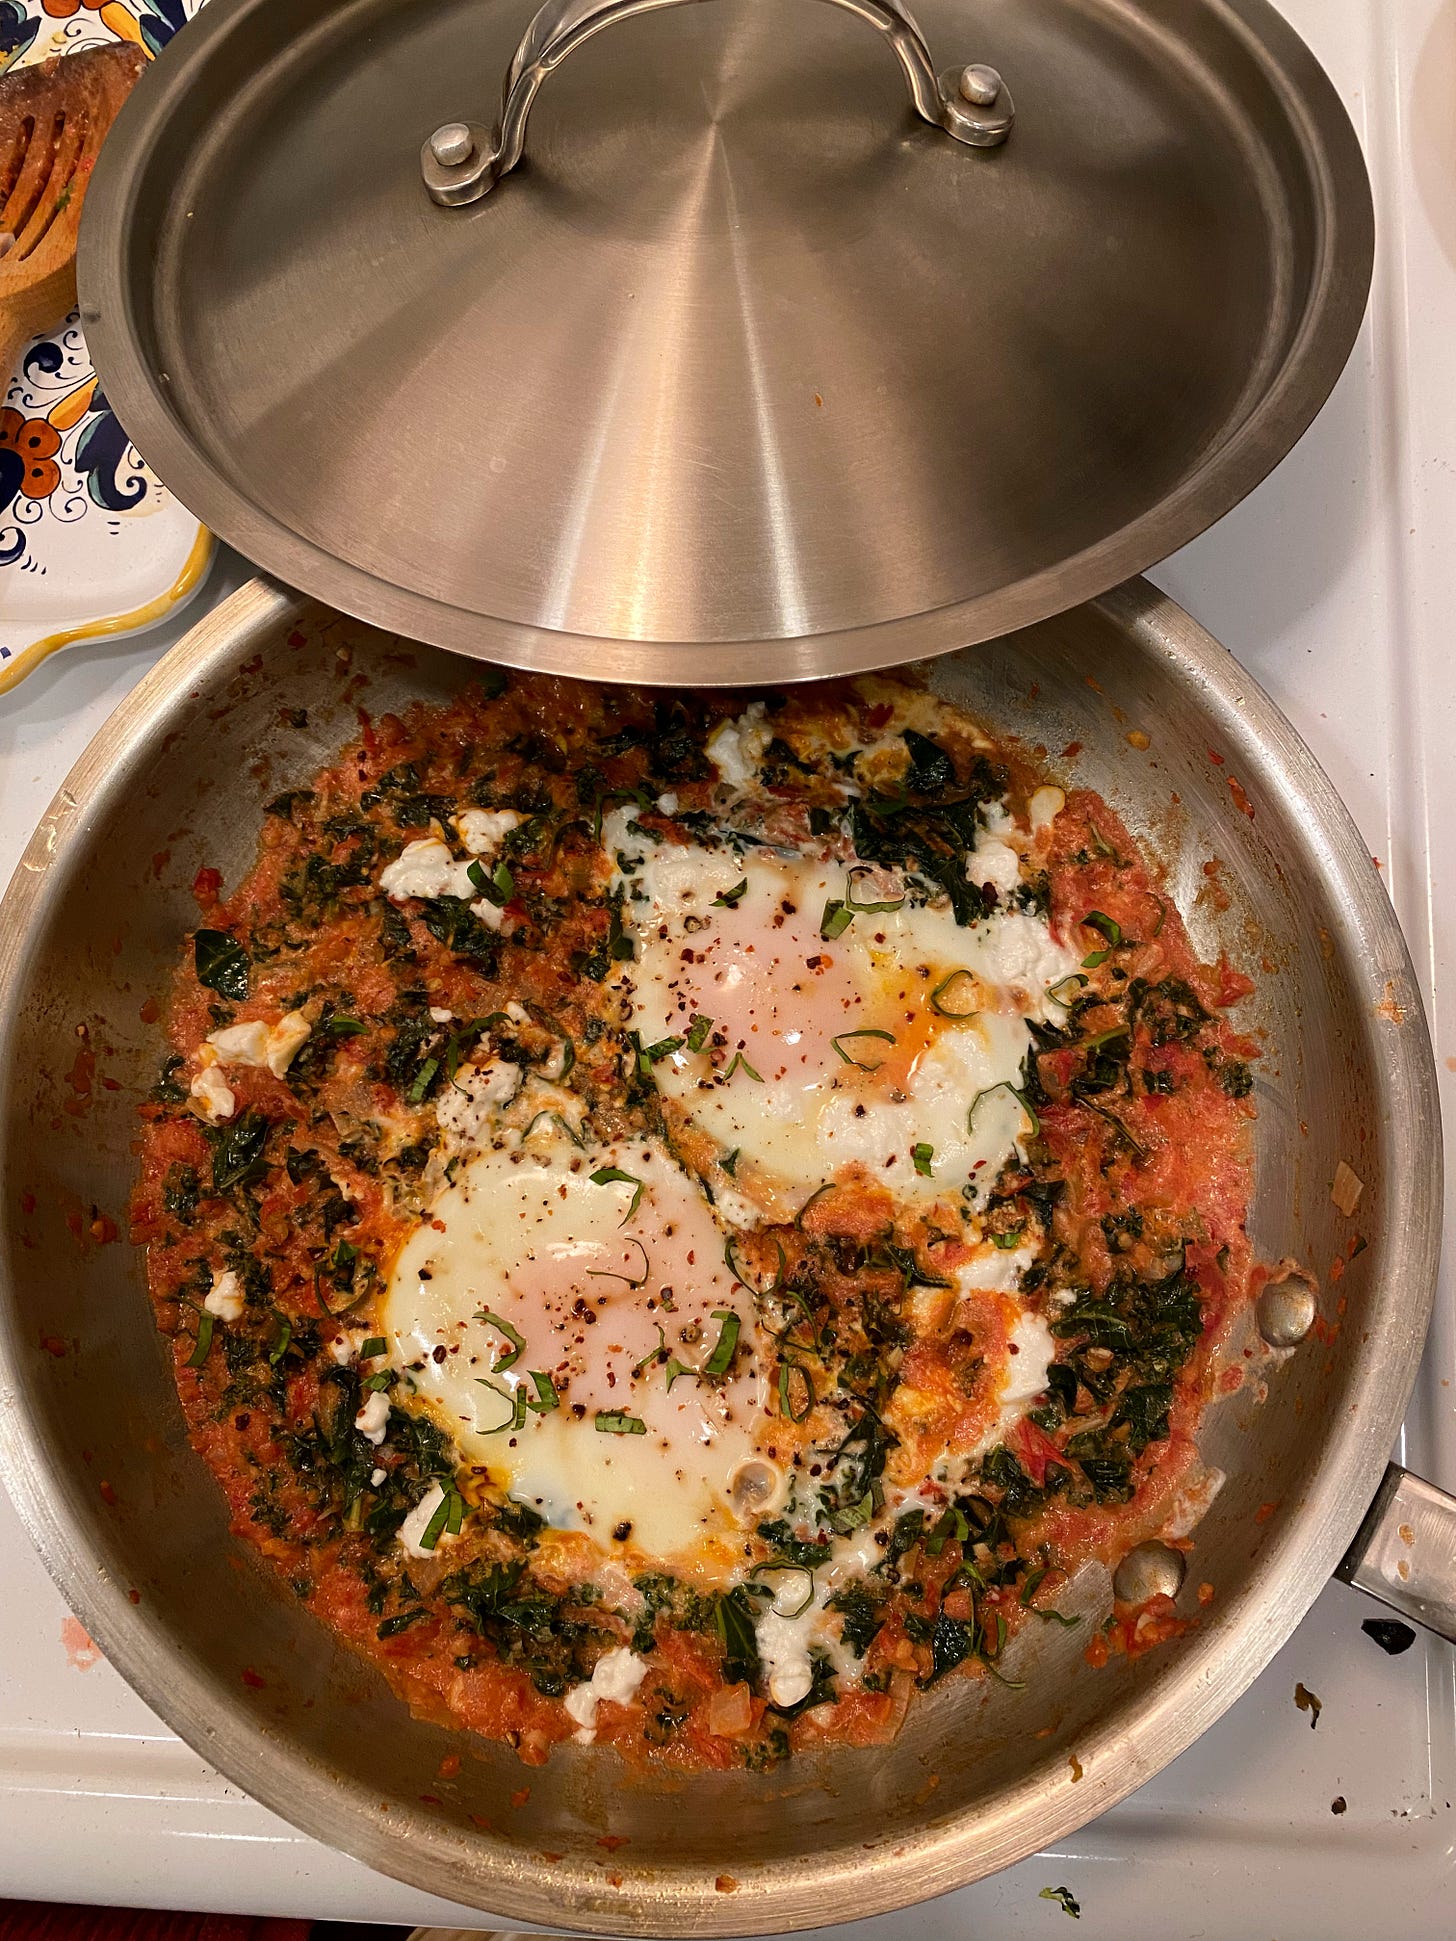 In a stainless steel pan on top of the stove, a creamy tomato sauce with pieces of kale. On top of it are two poached eggs and everything is sprinkled with chopped basil, pepper flakes, and crumbled feta. The lid to the pan is resting at the back edge.